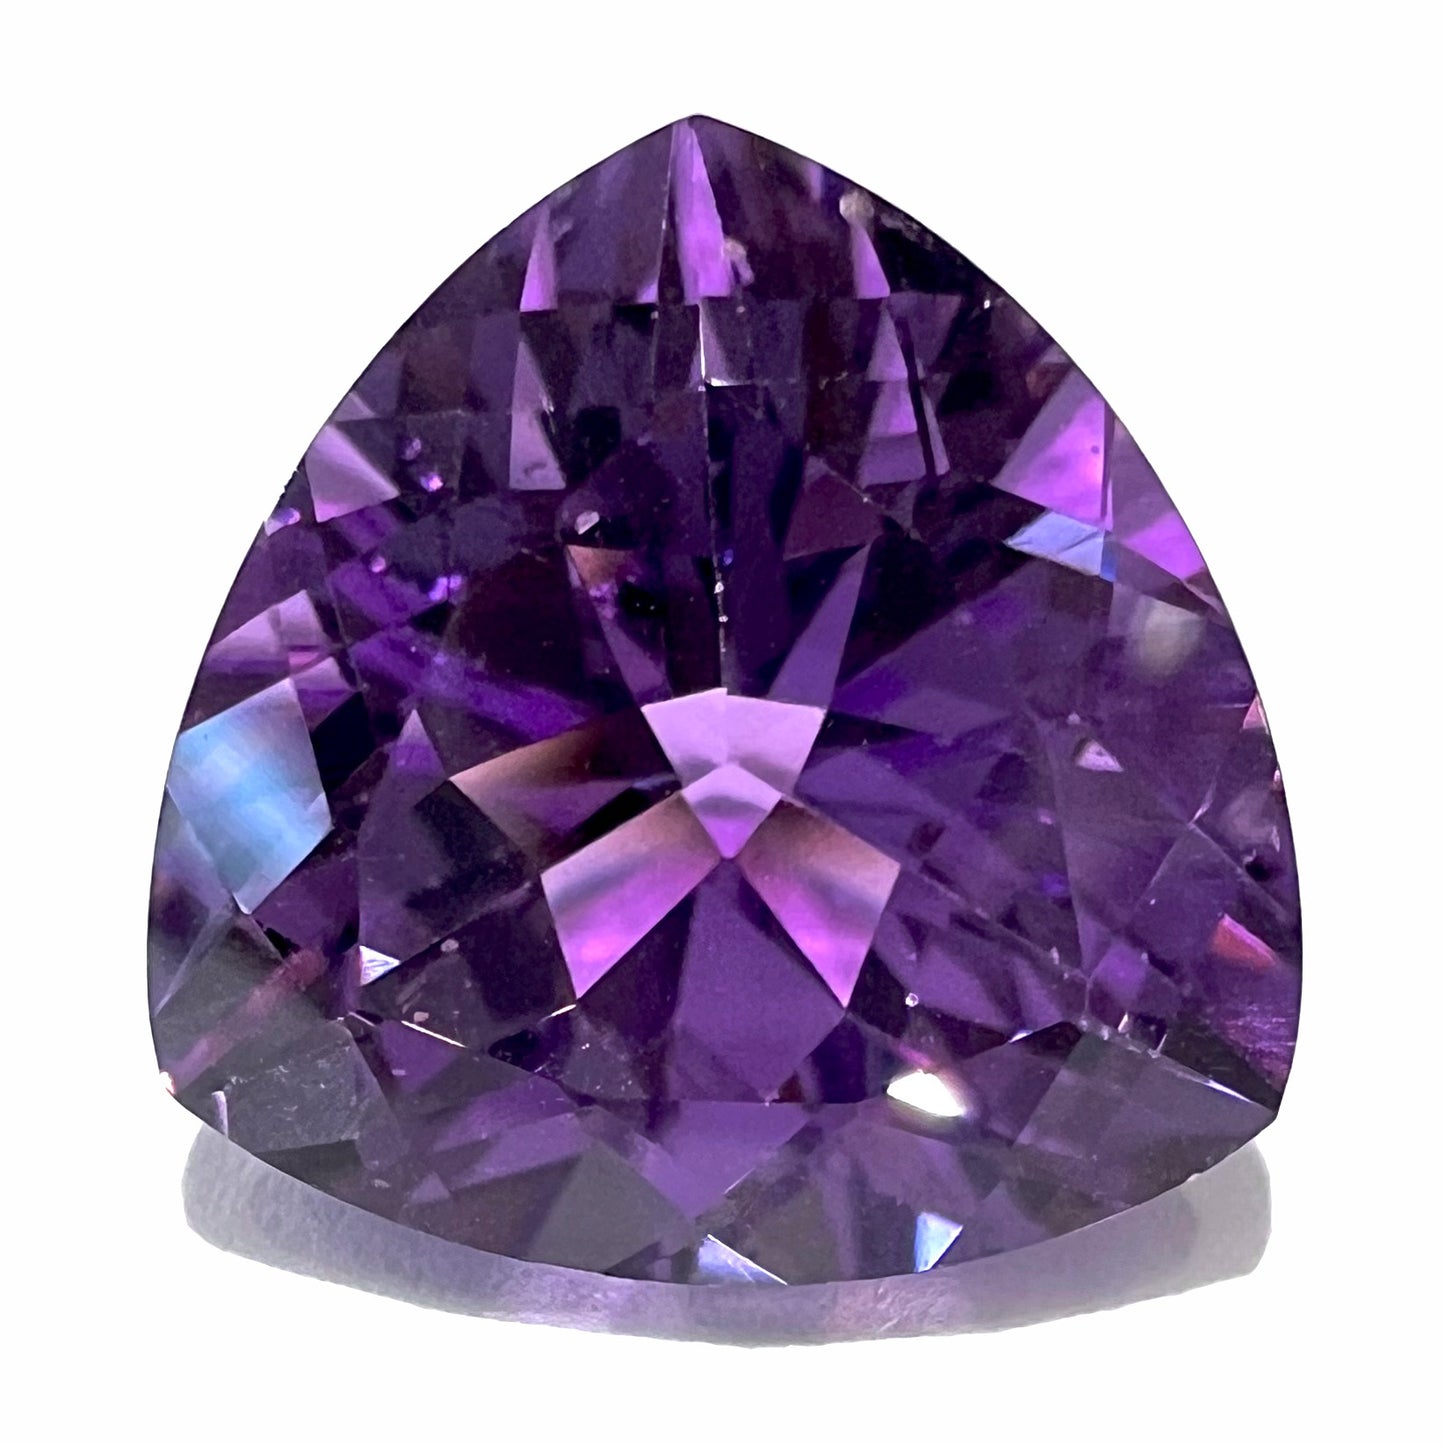 A loose, faceted trillion cut amethyst gemstone.  The gem is a purple color and weighs 8.46 carats.